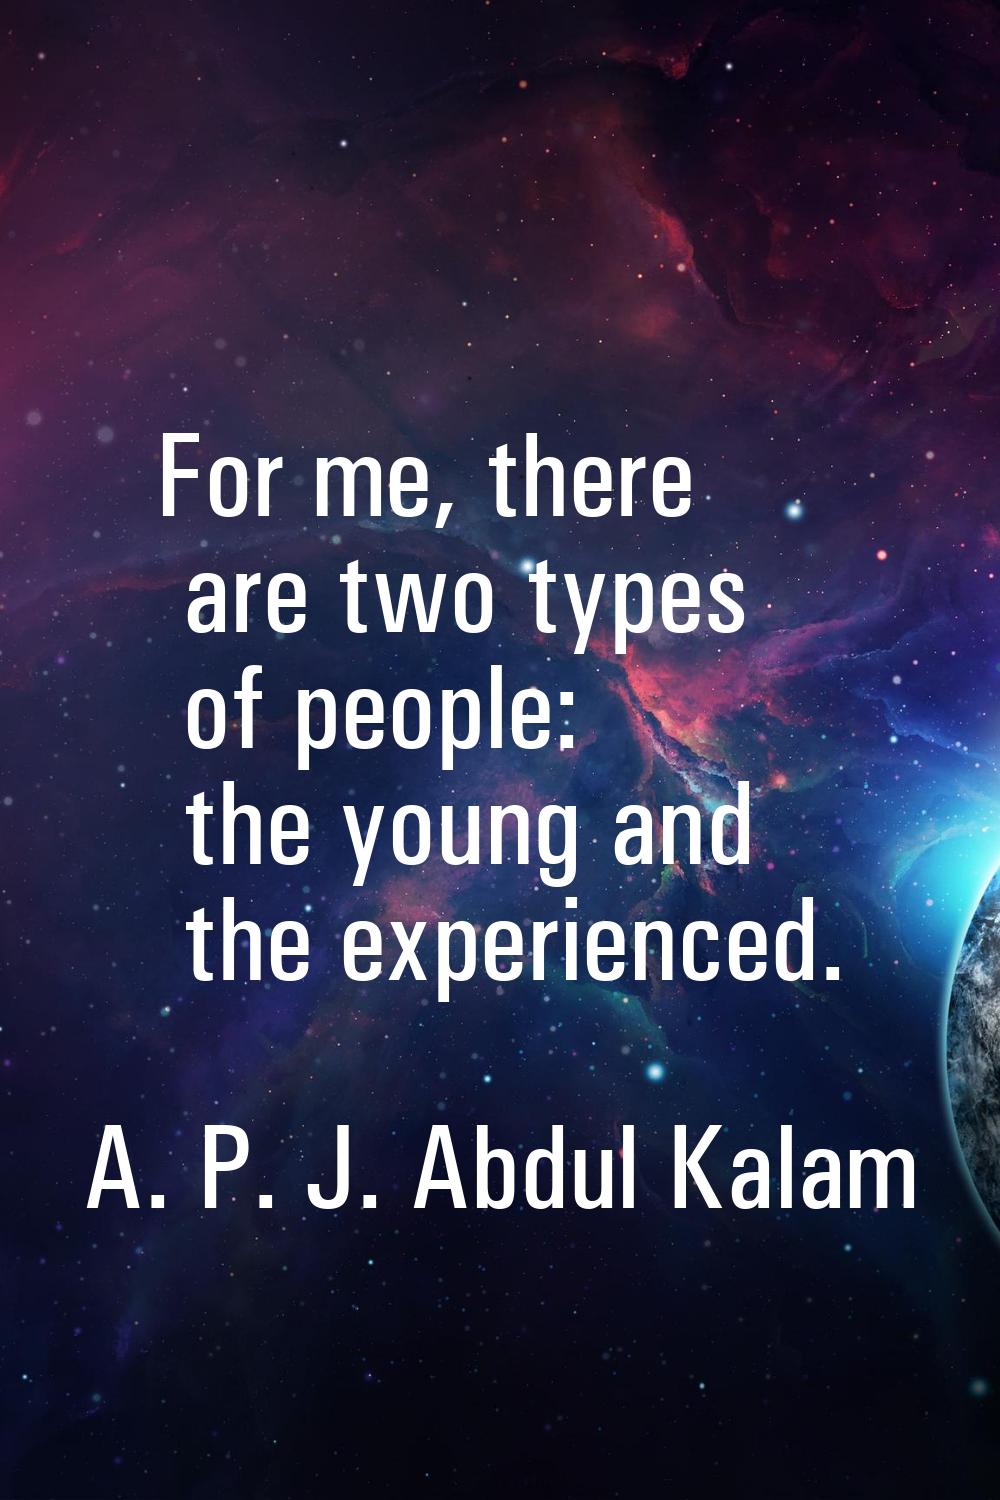 For me, there are two types of people: the young and the experienced.